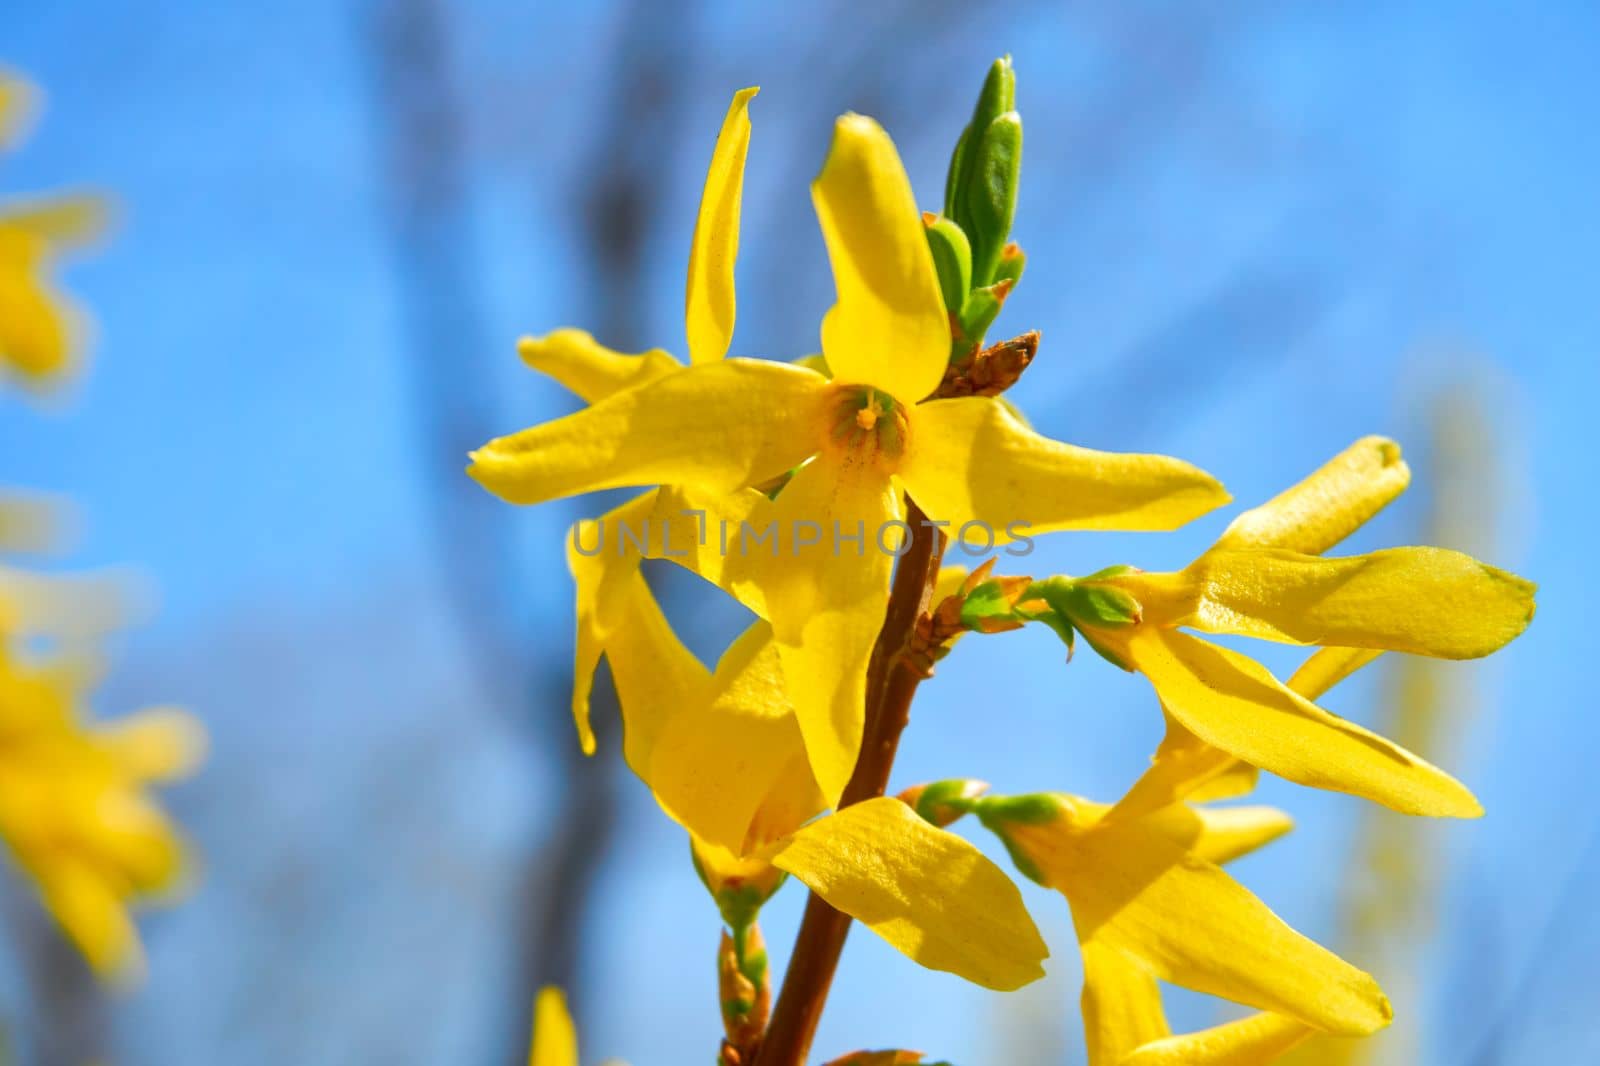 Blooming tender branch with Forsythia europaea shrub yellow flowers and blue sky by jovani68